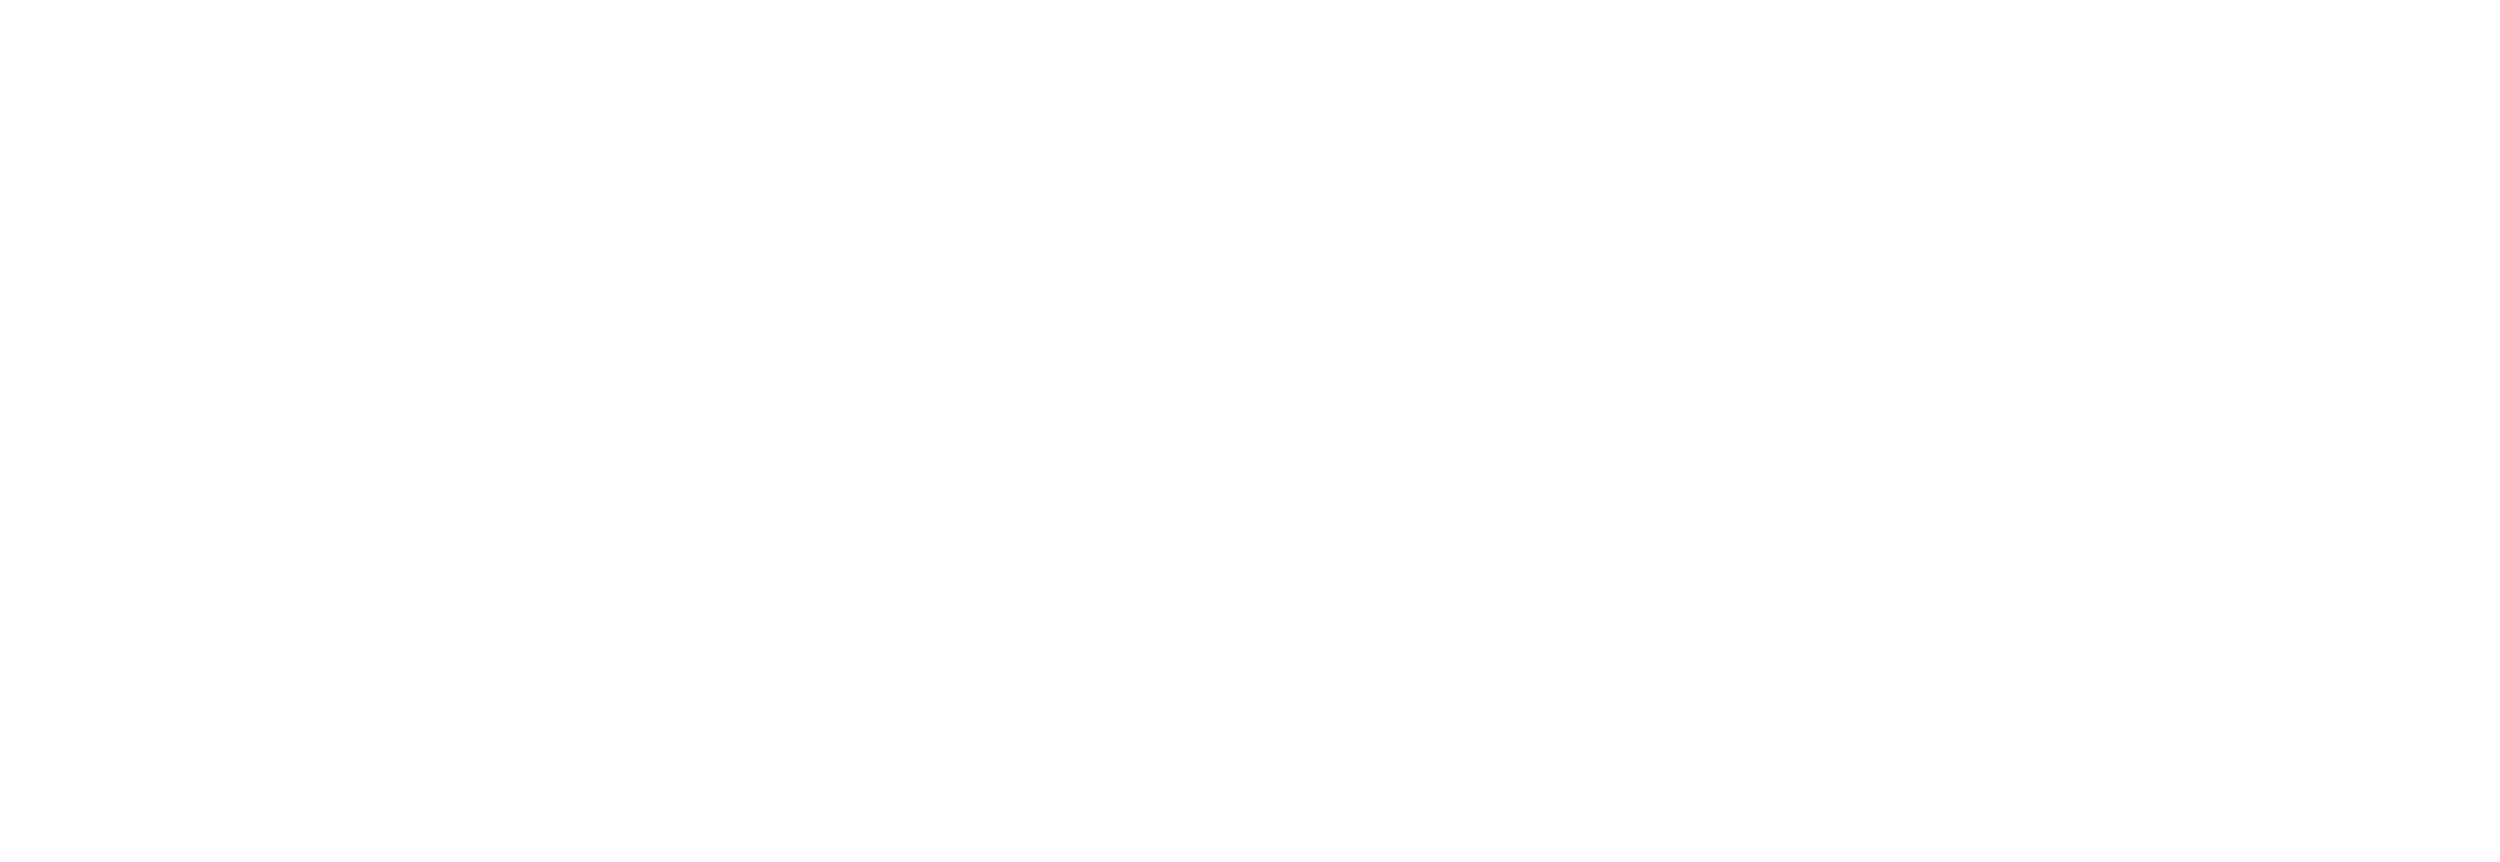 We are a Microsoft Select Partner marketing consultancy agency